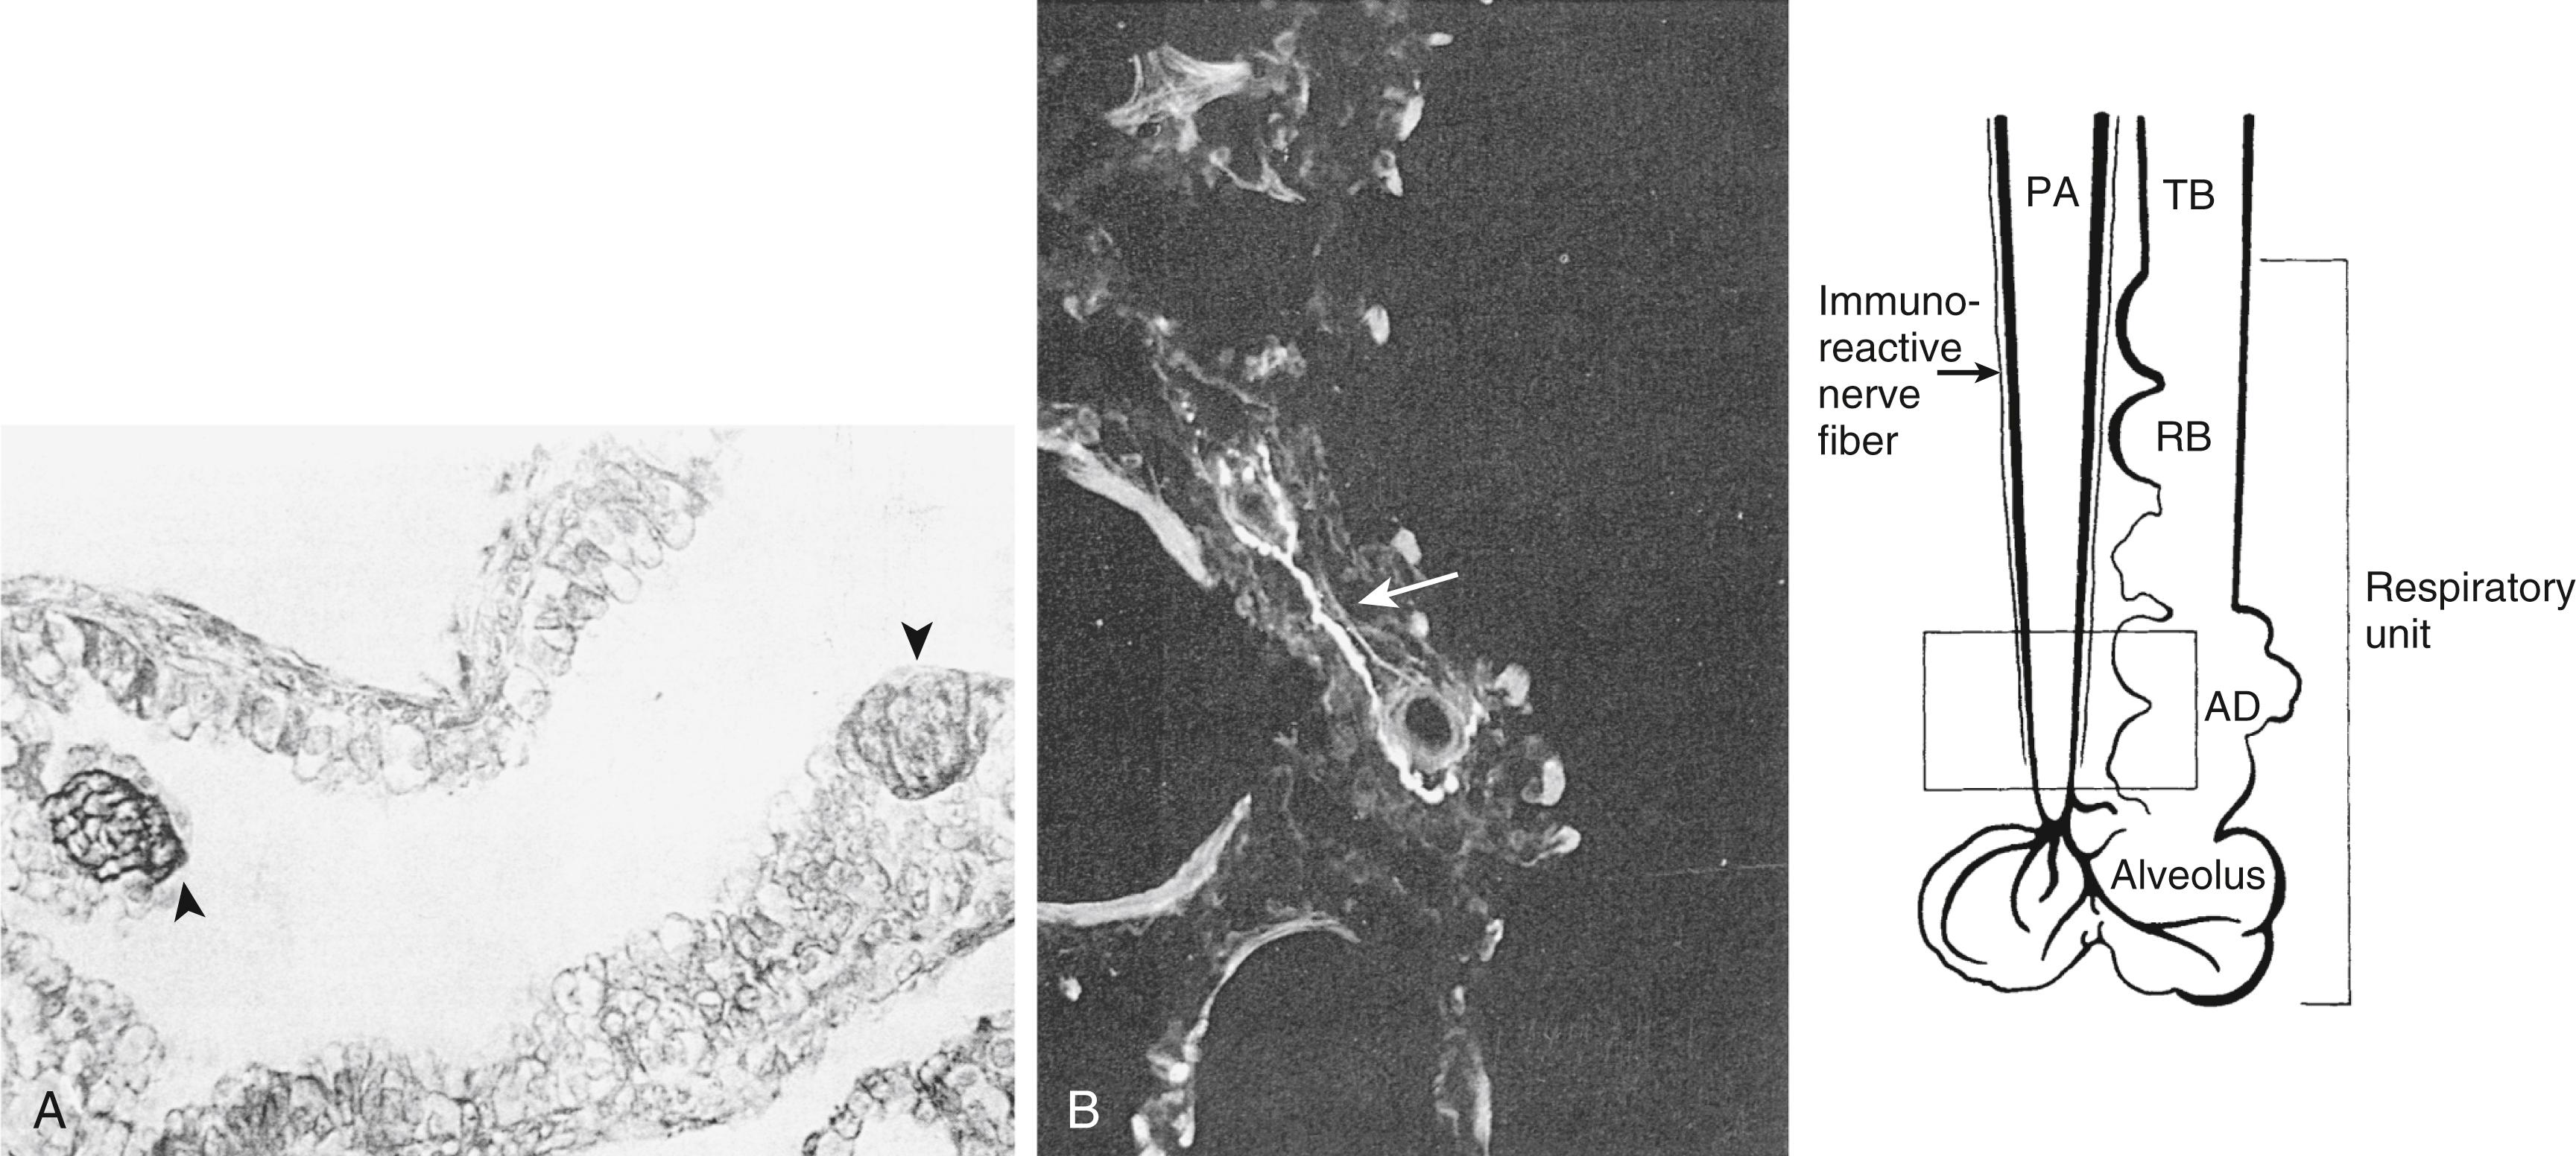 Fig. 47.6, (A) Neuroepithelial bodies (arrowheads) are seen as dark-staining regions (immunoreactive for serotonin) in the airway of a newborn infant. (B) Tyrosine hydroxylase immunoreactive perivascular nerve fibers (arrow) at the adventitial-medial border of an alveolar duct artery in a child age 2.5 years. Diagram on the right shows terminal bronchiole (TB) and airways of respiratory unit accompanied by an innervated pulmonary artery (PA) . AD, Alveolar duct; RB, respiratory bronchiole; square indicates area shown in (B).